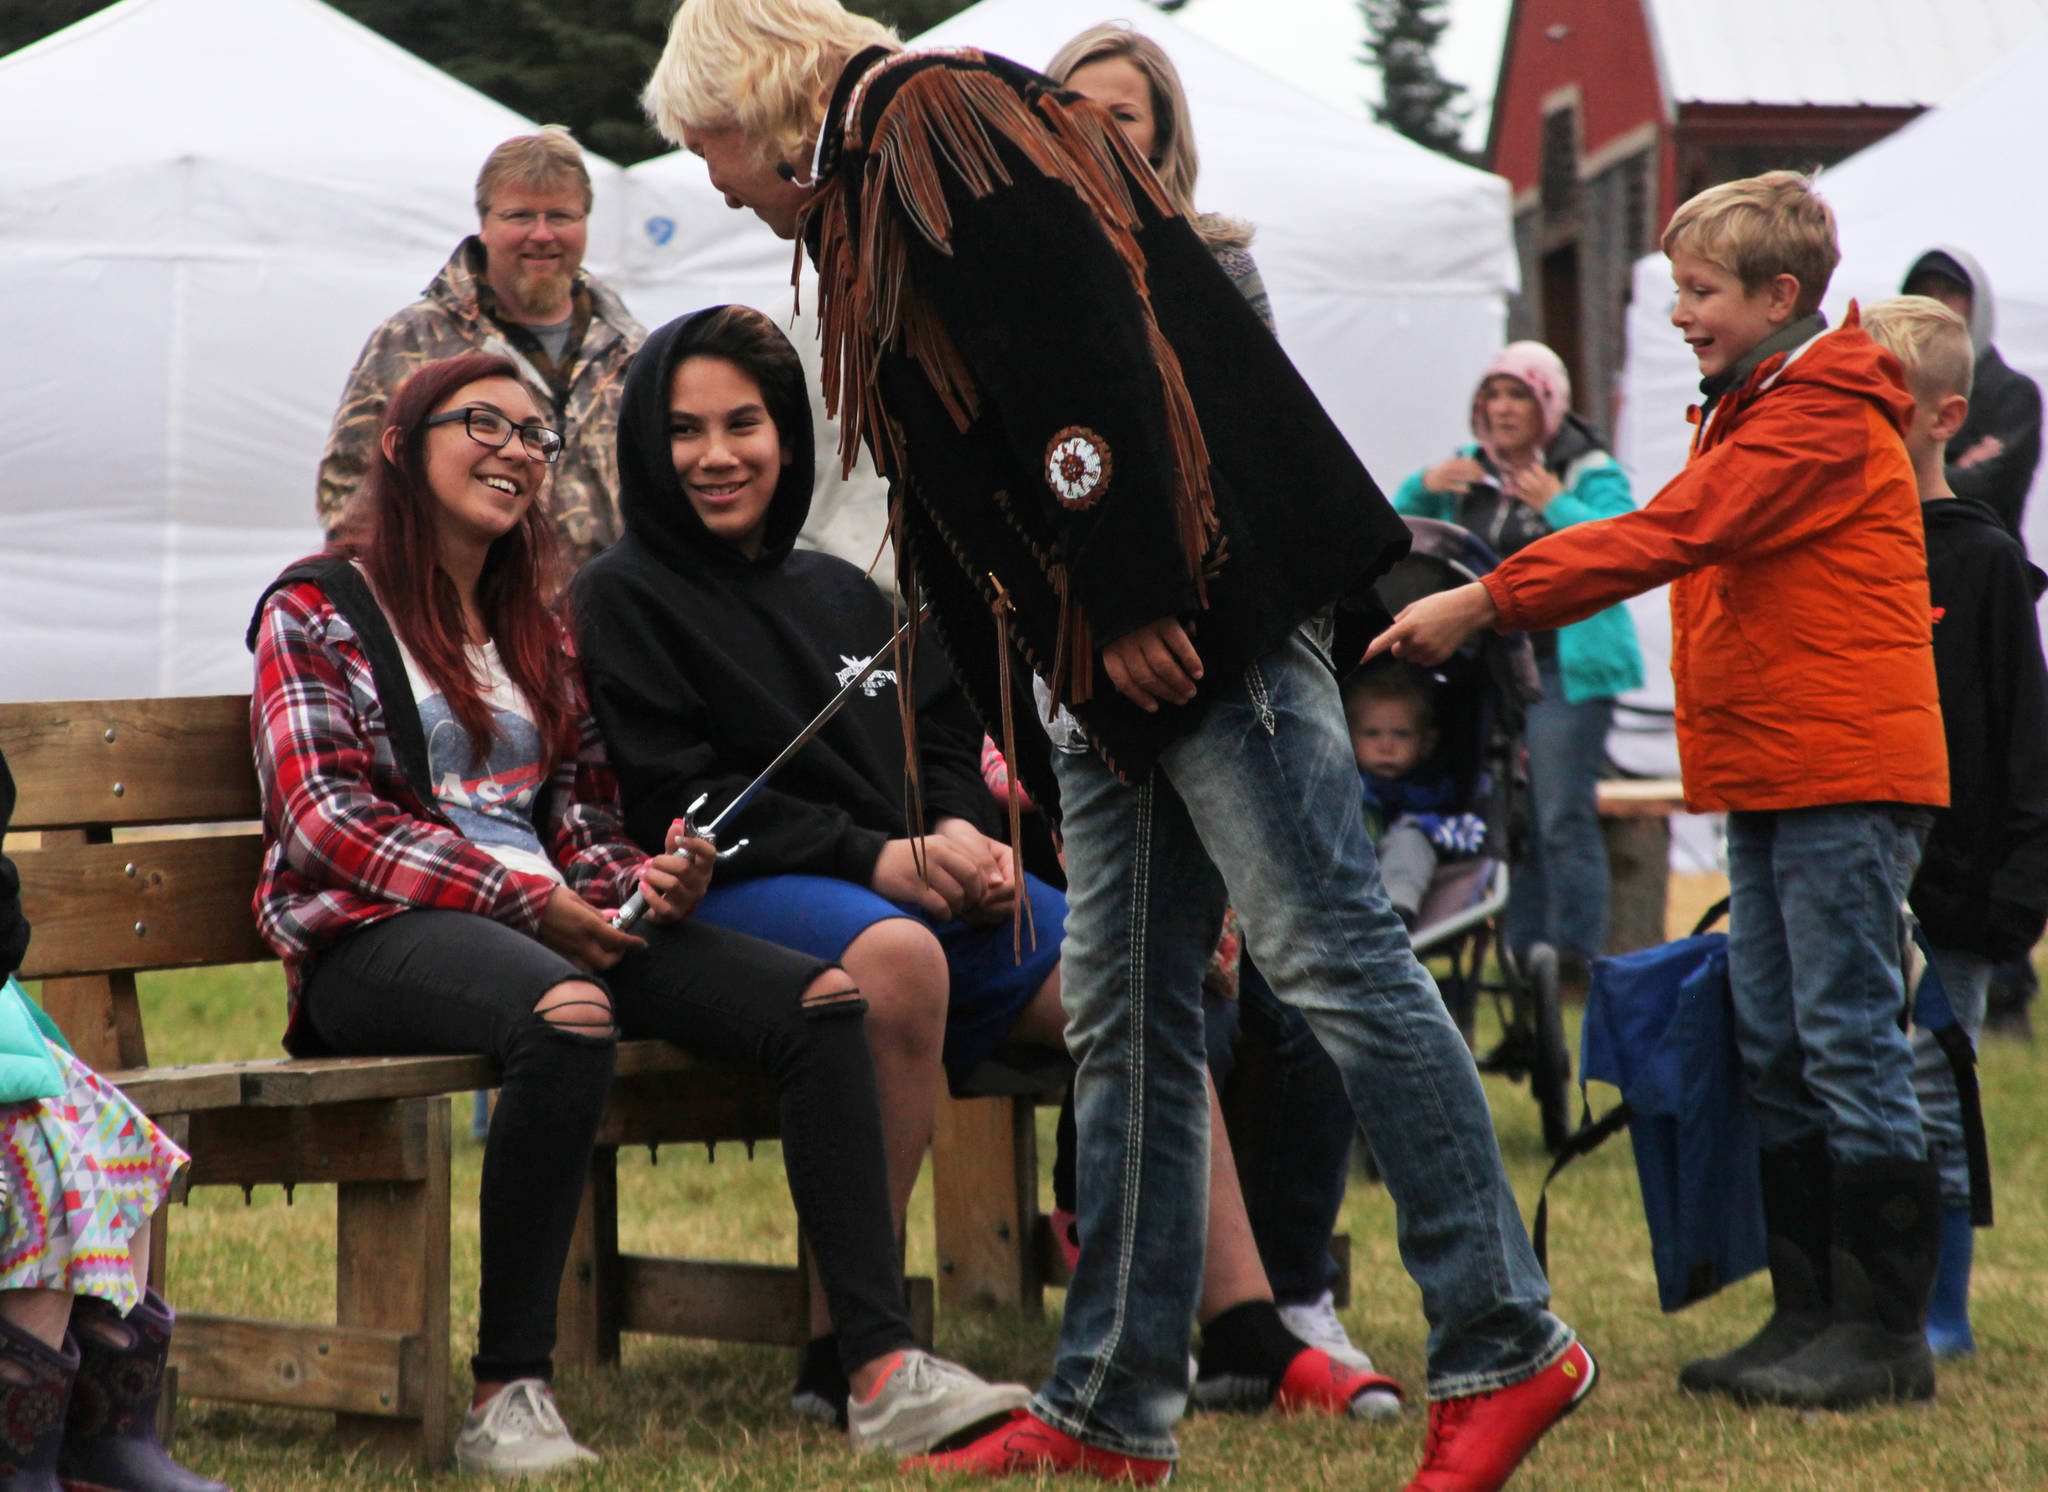 Sword swallower Dan Meyer presents a sword to audience member Cheyenne Juliussen, who pulled the sword out of his throat during Meyer’s last act, on Saturday, August 18, 2018 in Ninilchik, Alaska. (Photo courtesy Ben Boettger)